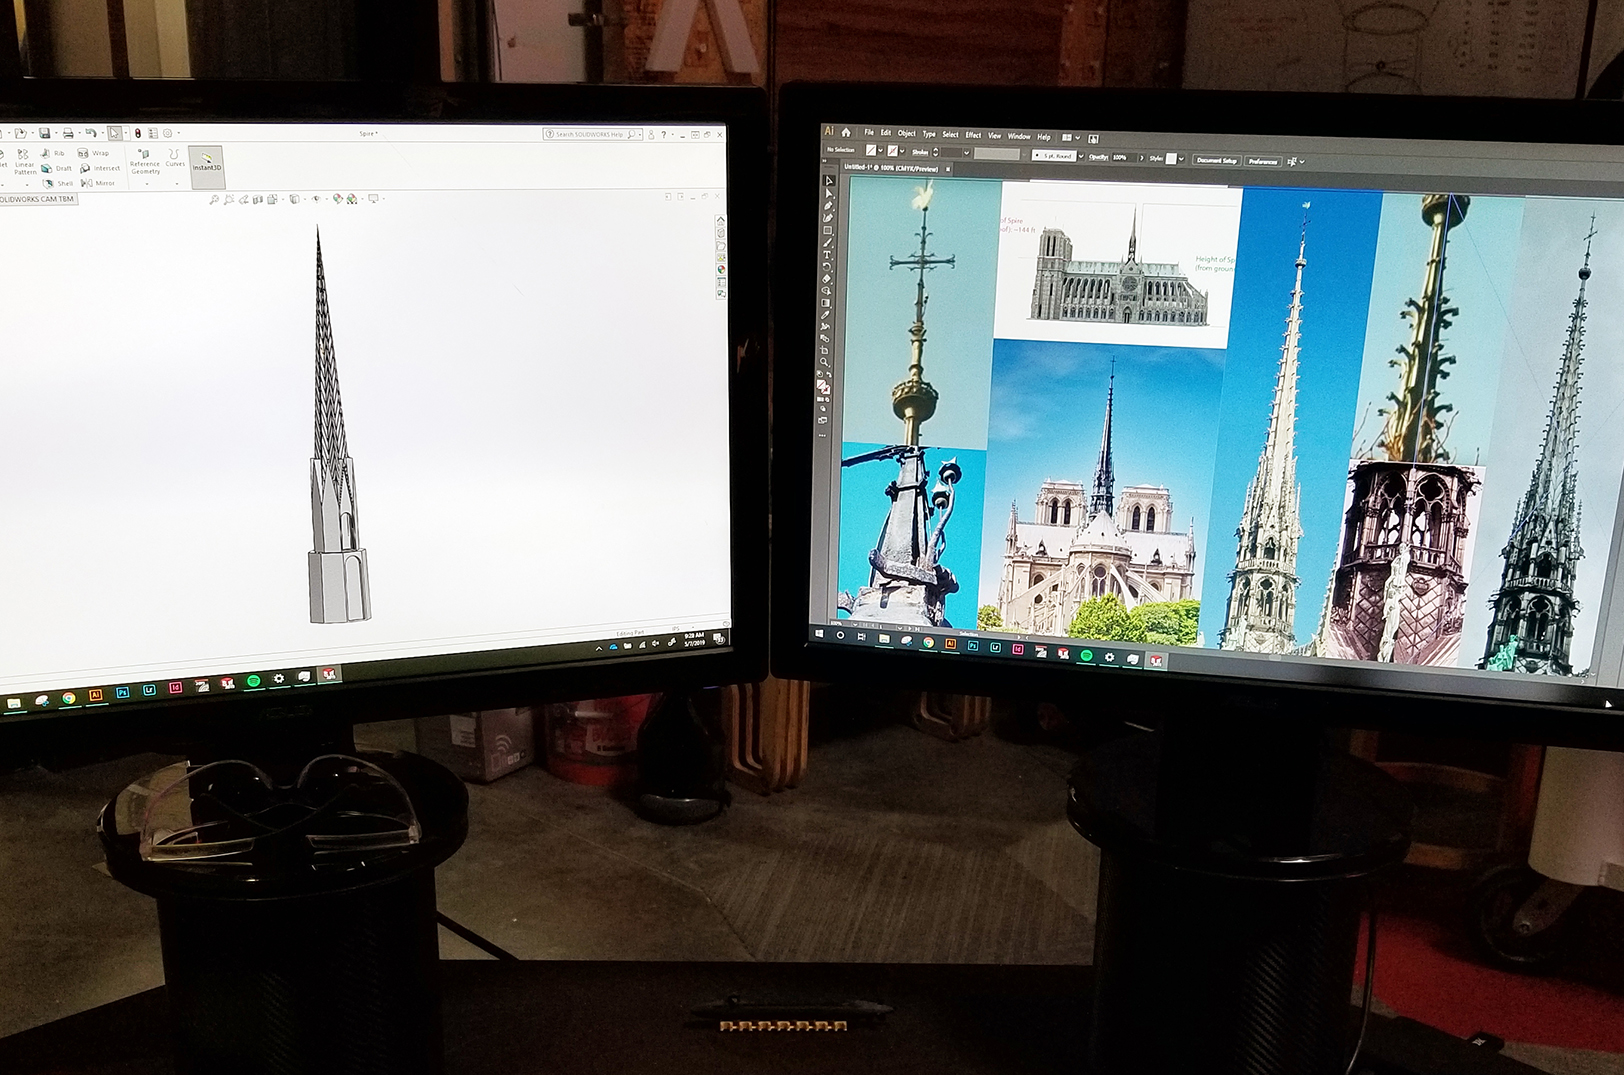 Design by fire: Could a Kansas City company 3-D print the Notre Dame spire?